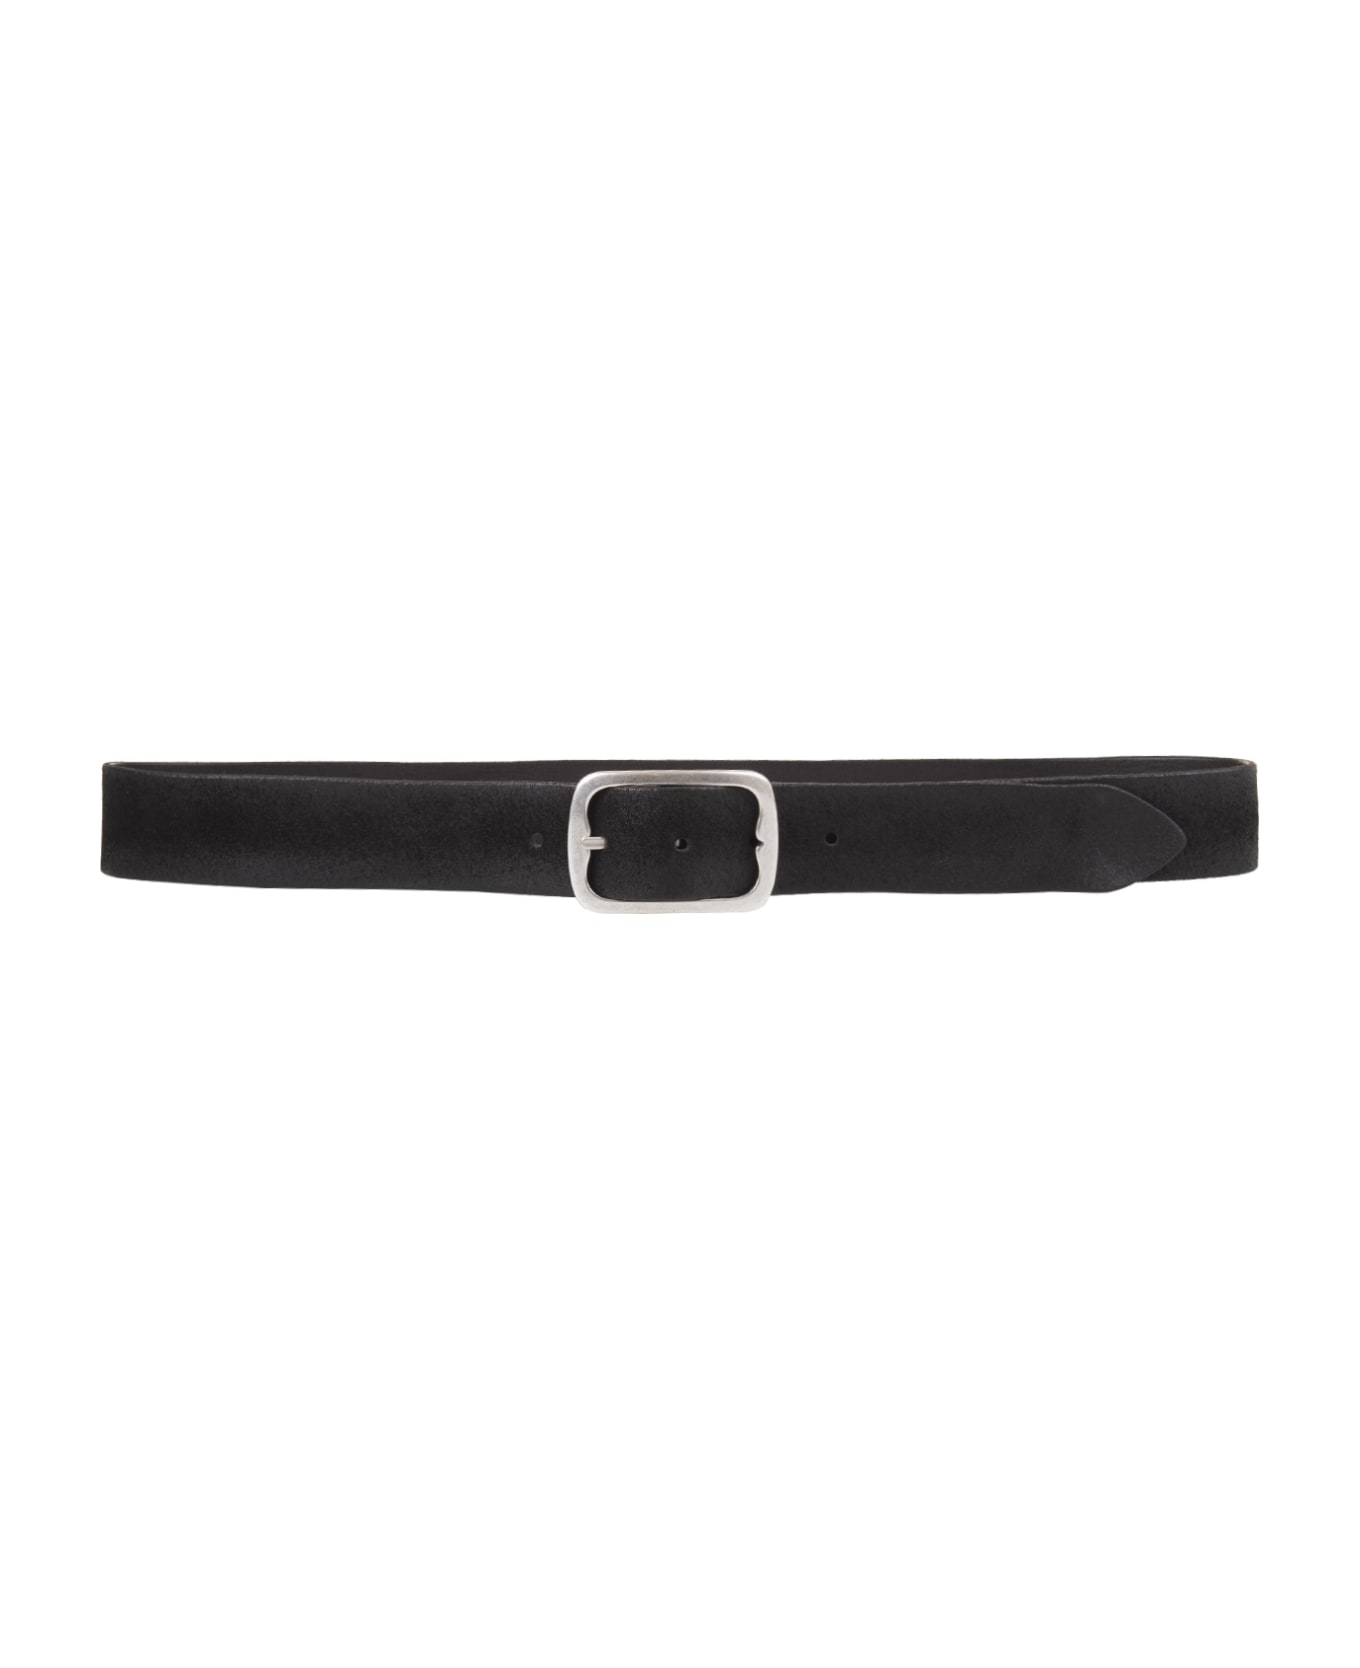 Orciani Reversible Hunting Double Belt In Black Suede - Black